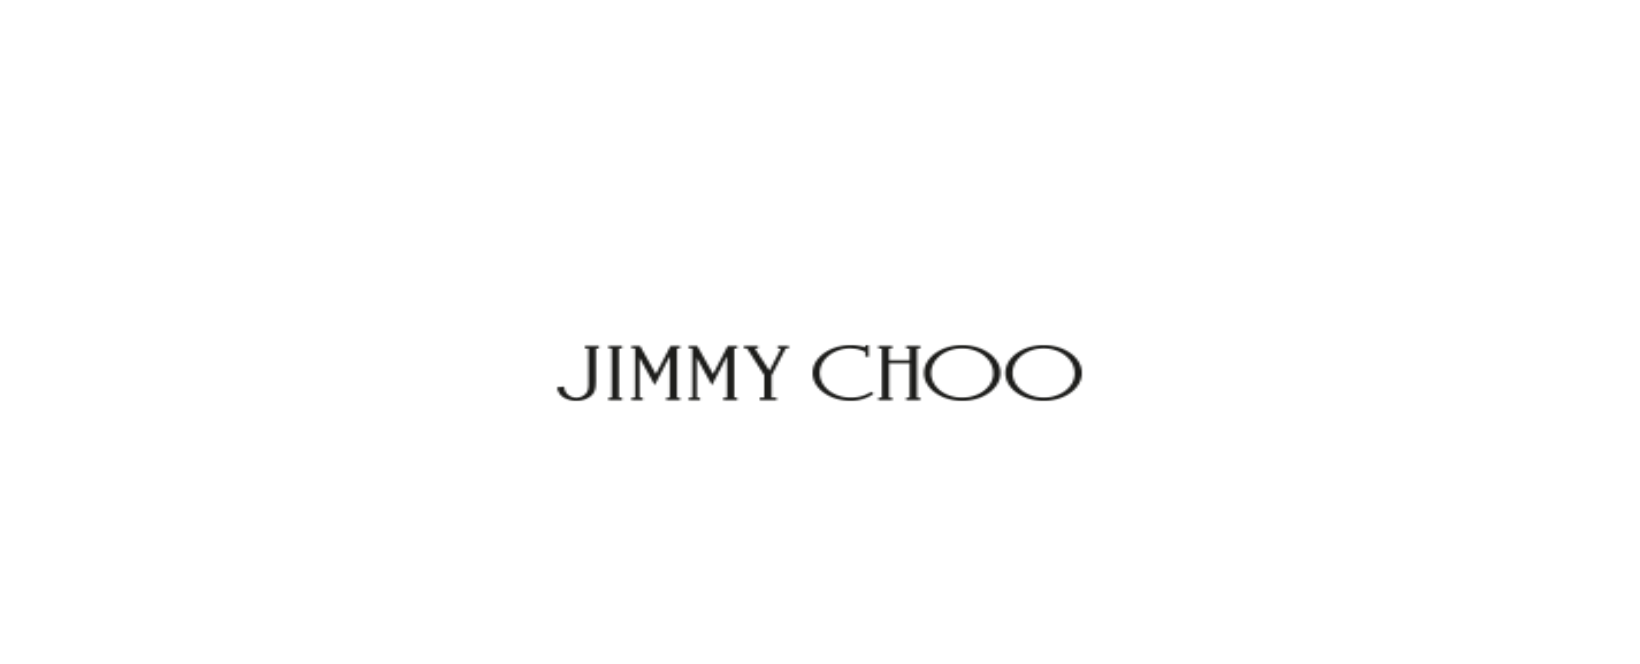 Jimmy Choo Review – The Artisans of Luxury Shoes and More!